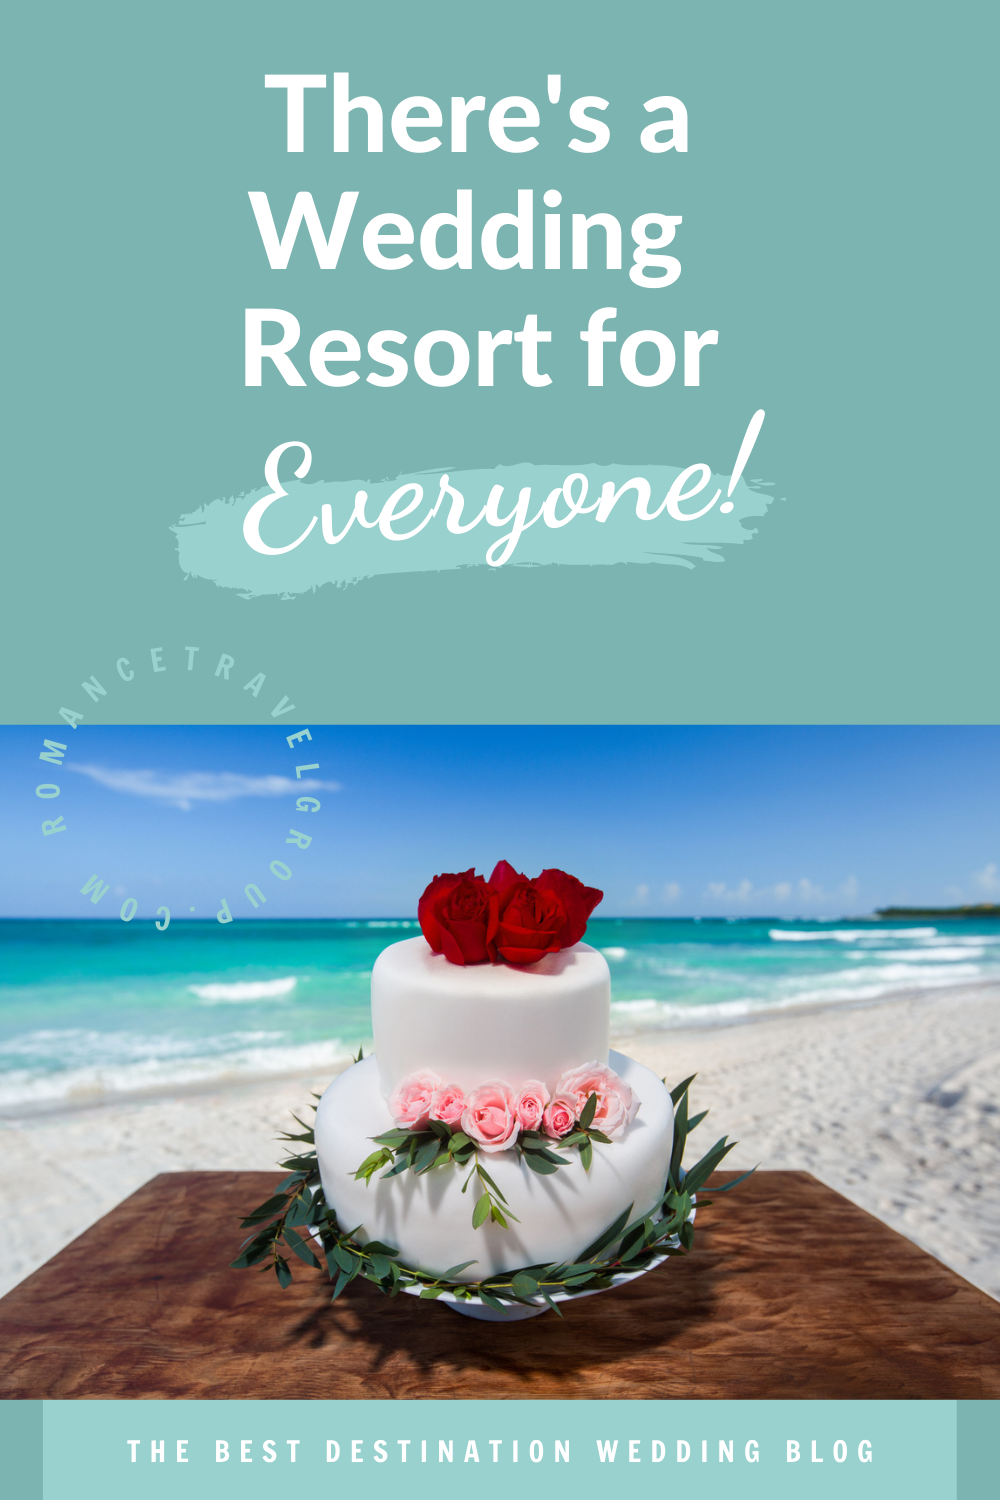 There's a Wedding Resort for Everyone!